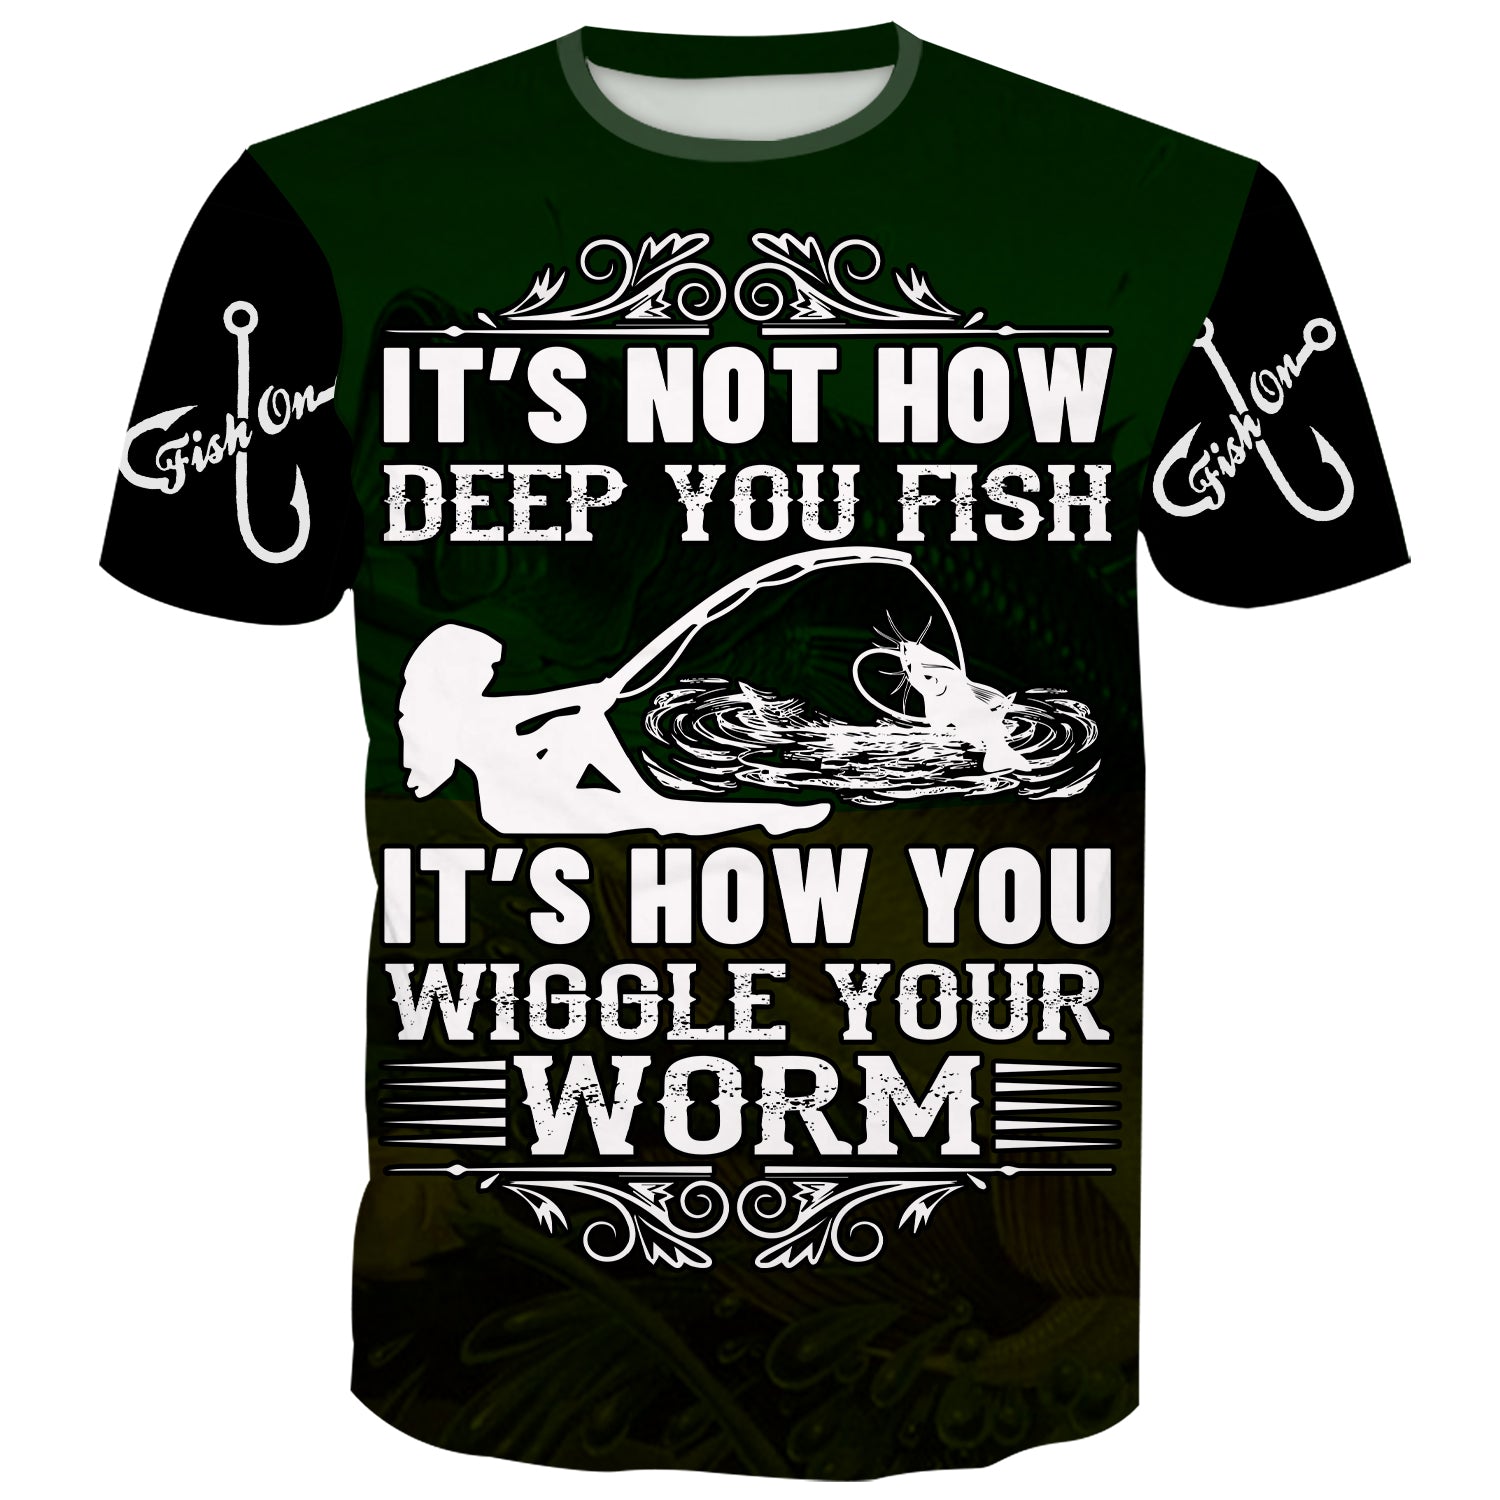 It's not how deep you fish, It's how you wiggle your worm - T-Shirt